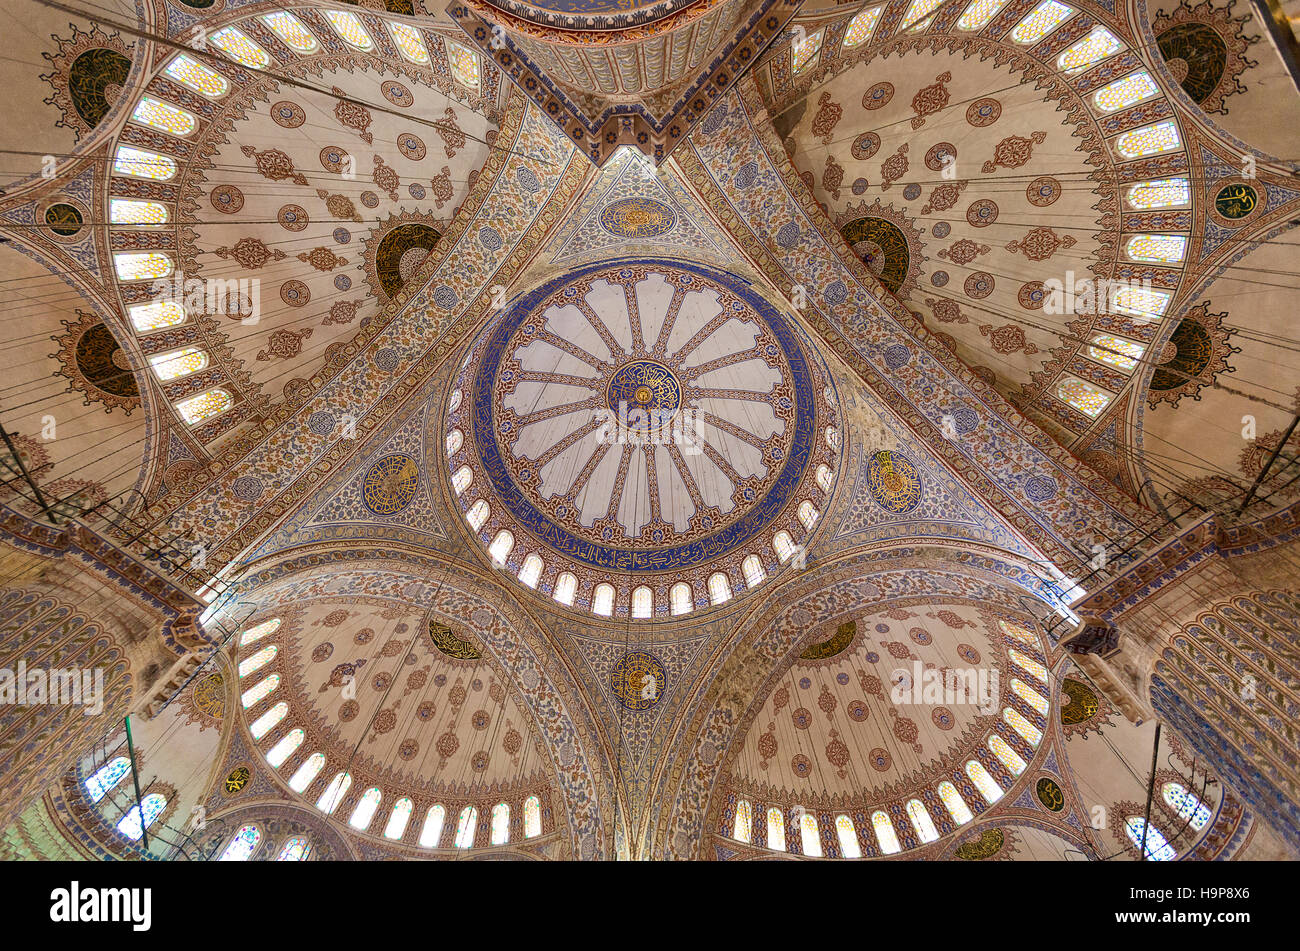 Central domes and semi domes of the Blue Mosque from inside, in Istanbul, Turkey. Stock Photo